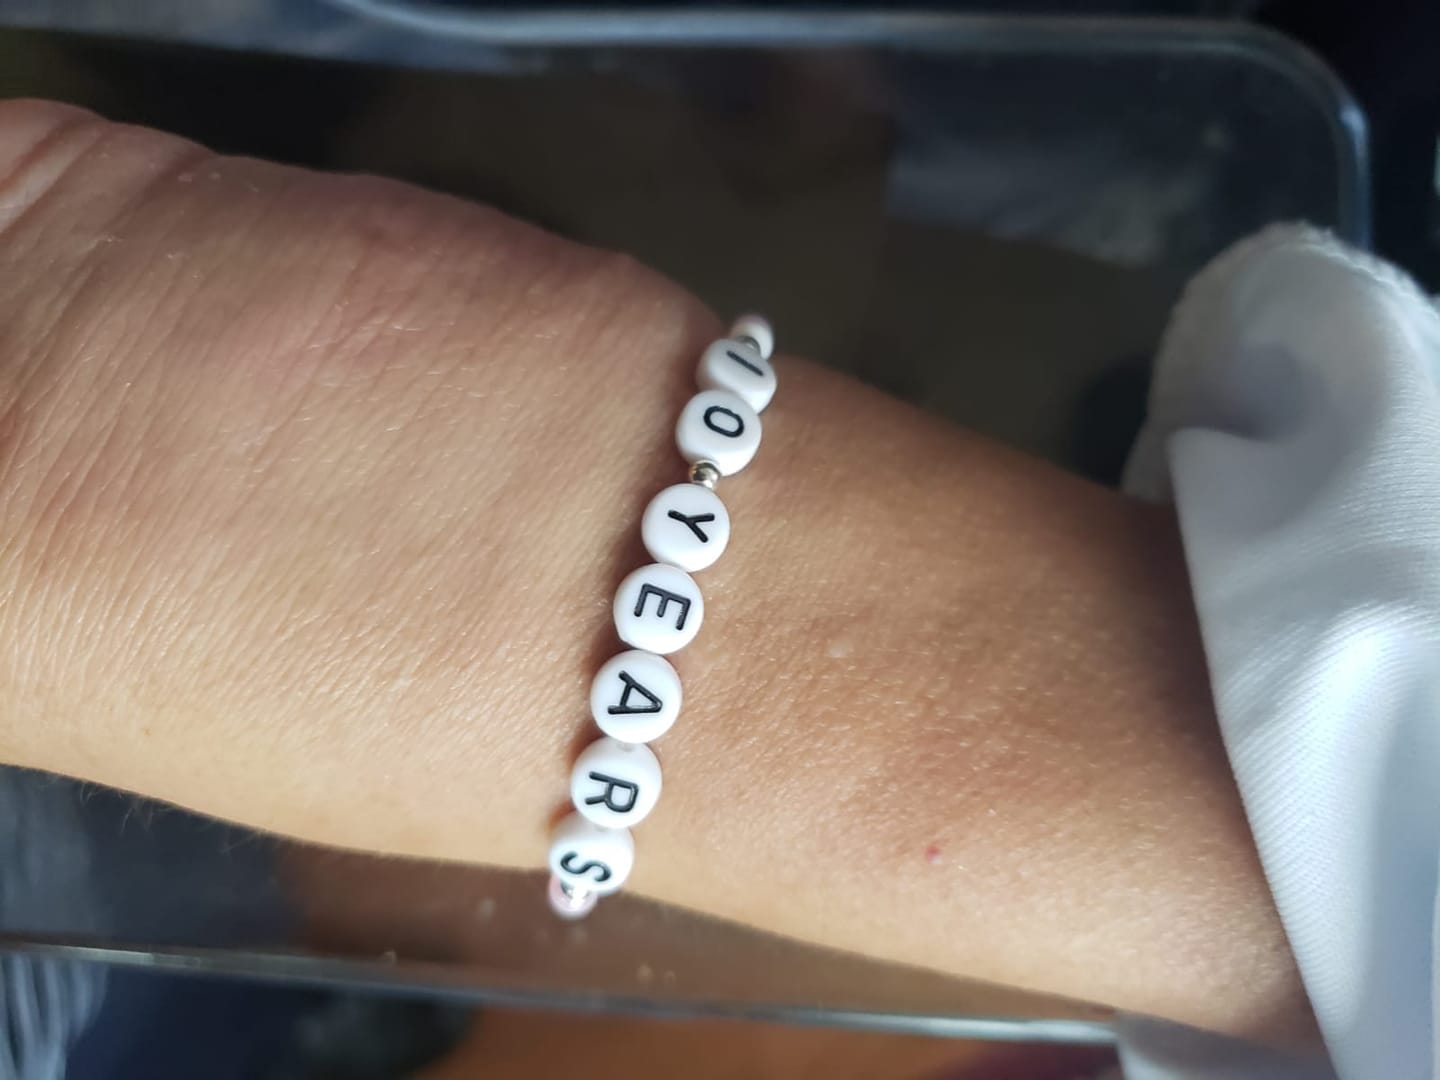 A special bracelet made by Sheri’s cousin in honor of her 10 years of breast cancer survival, 11-20.